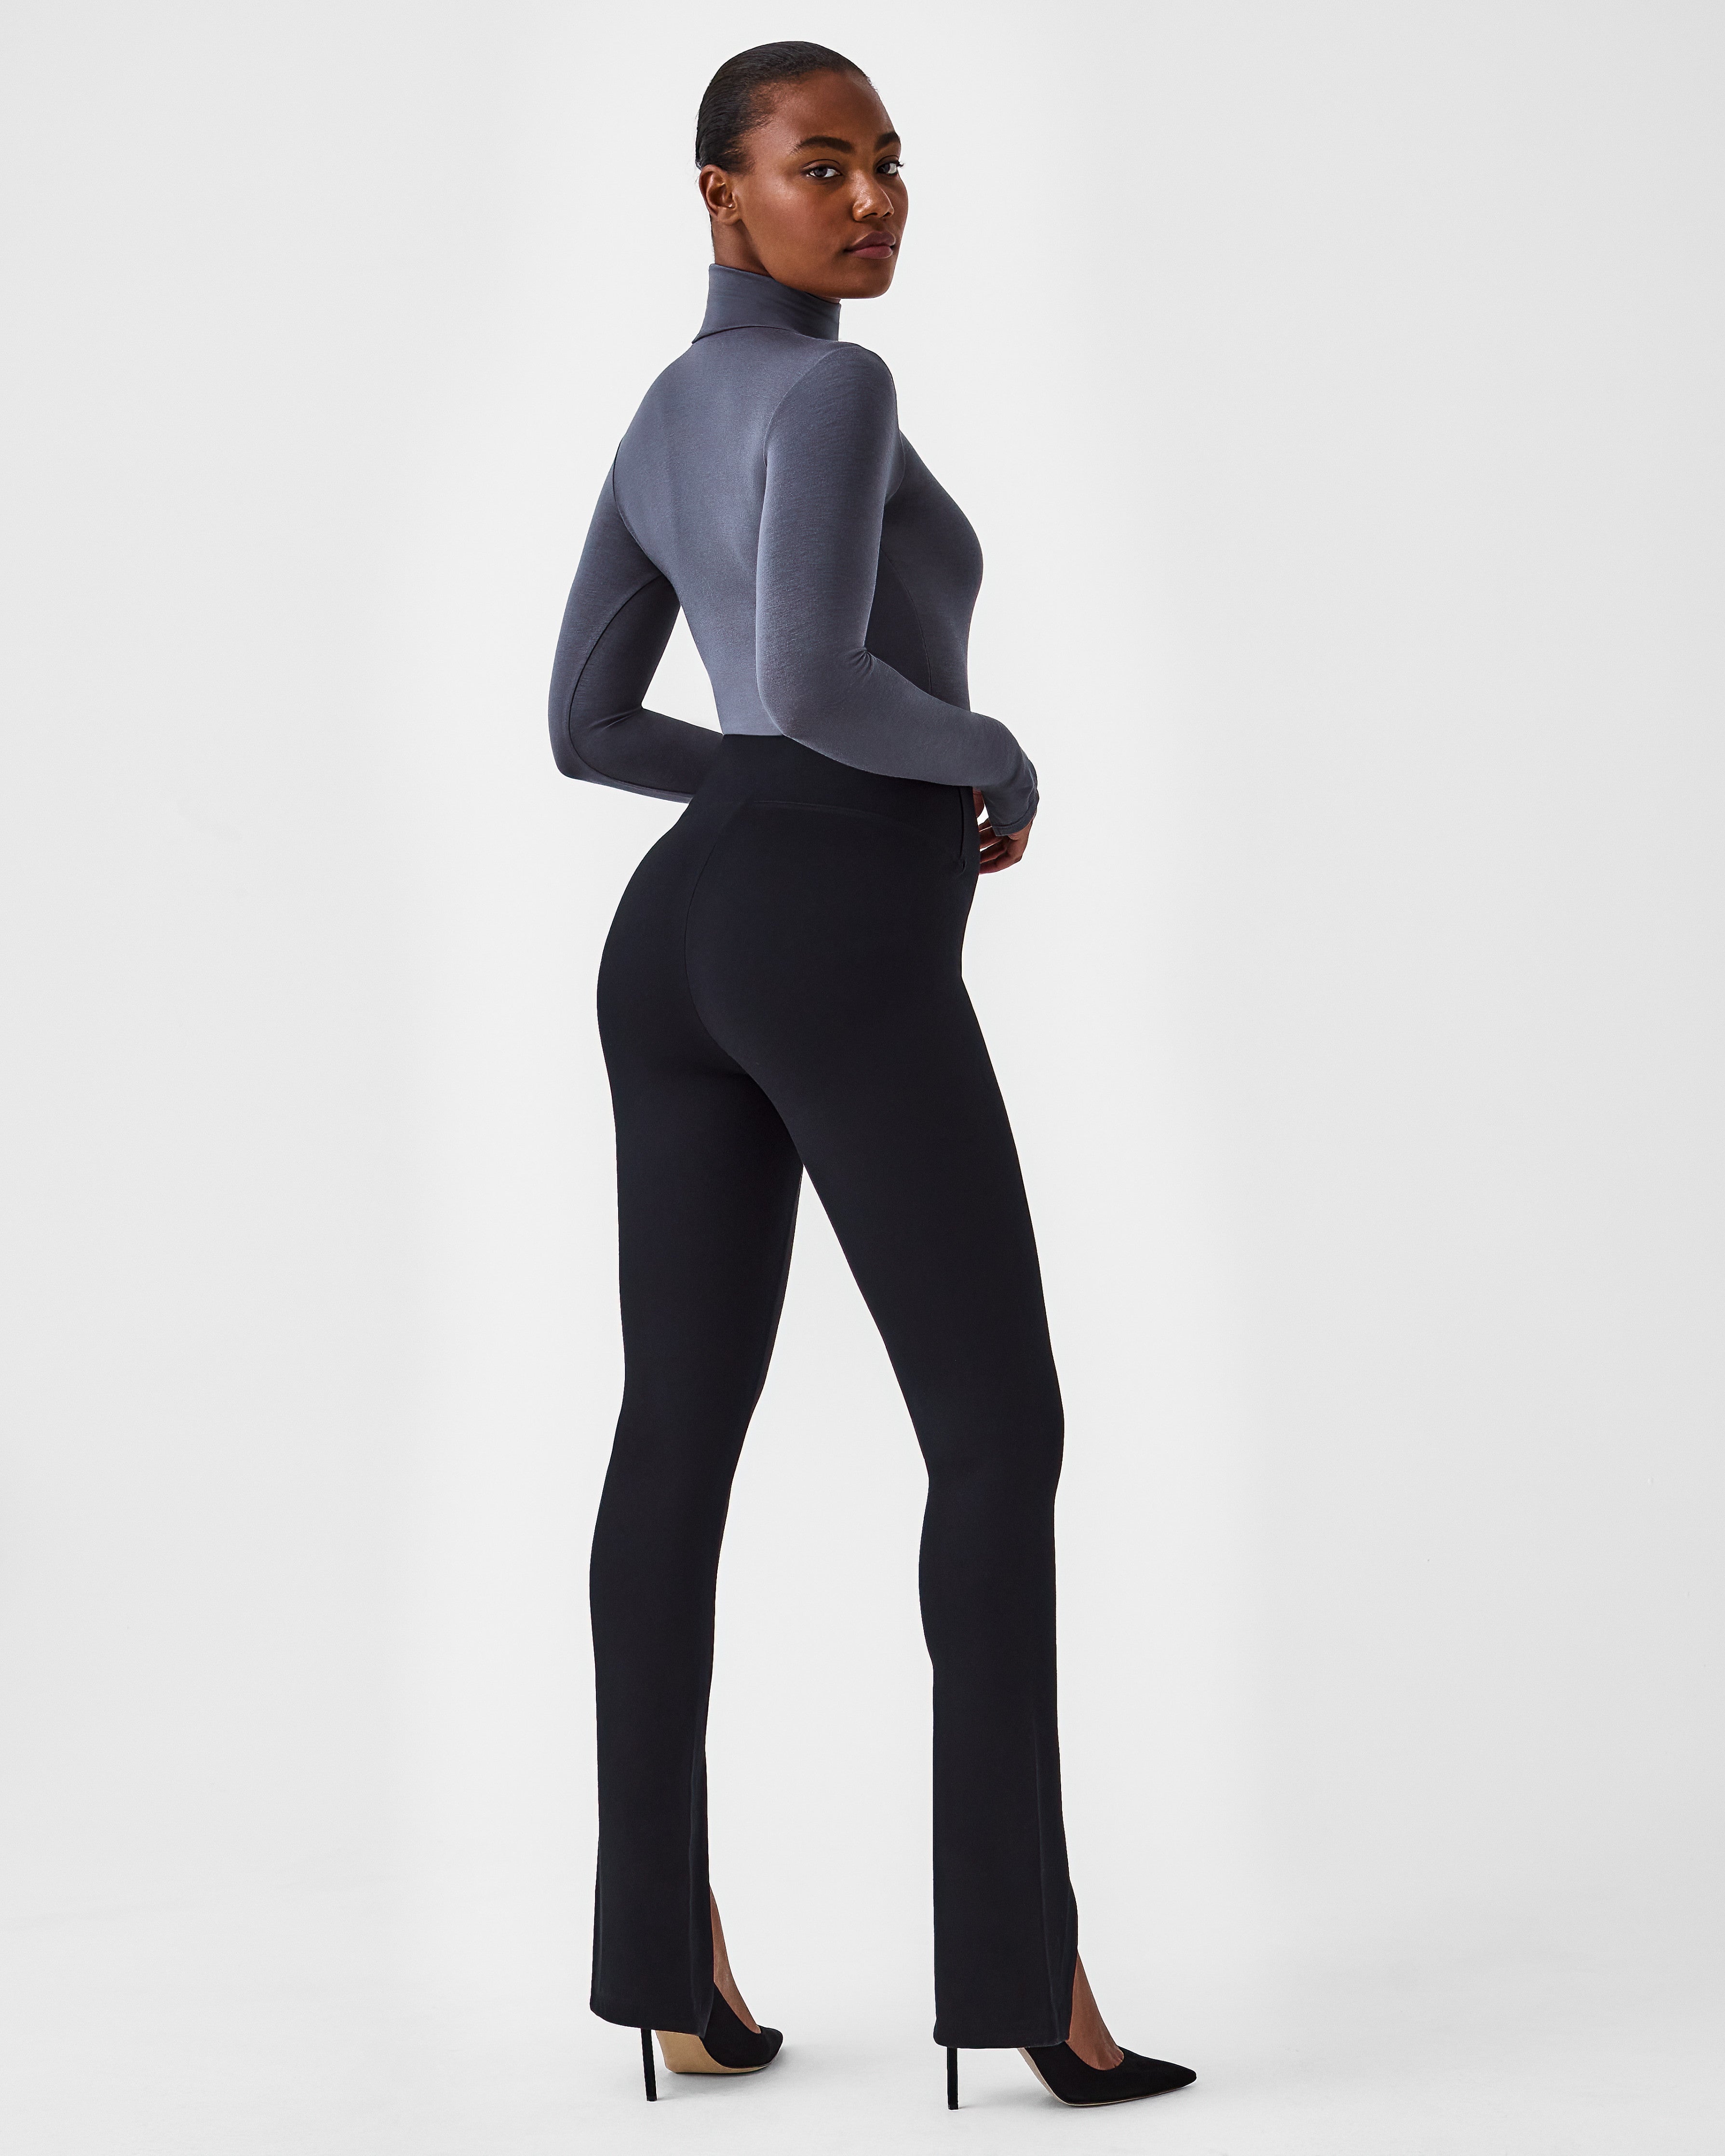 Spanx's Ultra-Flattering Leggings with a Built-In Sculpting Secret